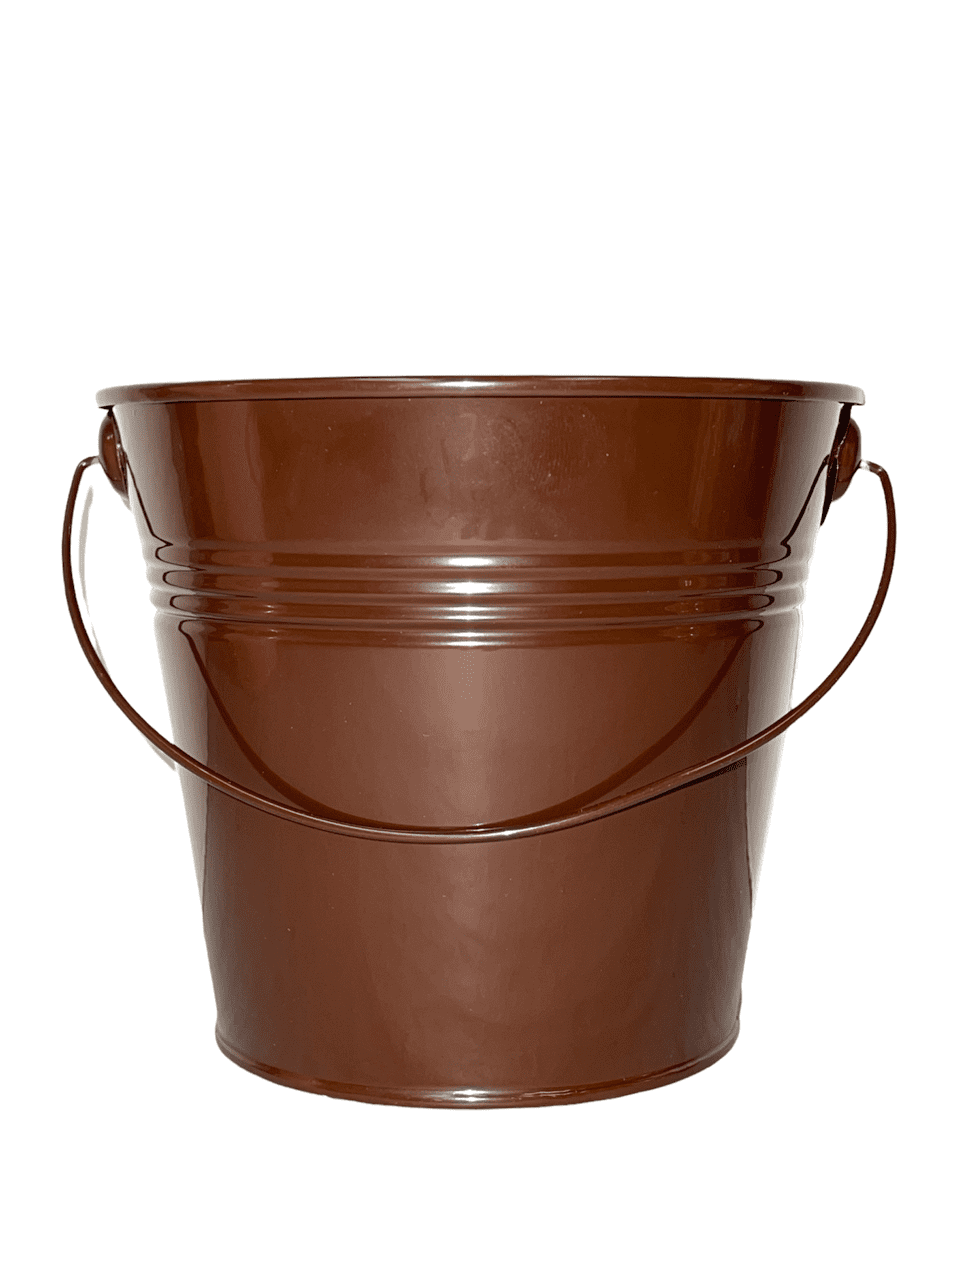 Colored Mini Metal Buckets - 3-Pack Colorful Tin Pails with Handles,  Small-Sized for The Beach, Party Favors, Easter, Candy, or Garden;